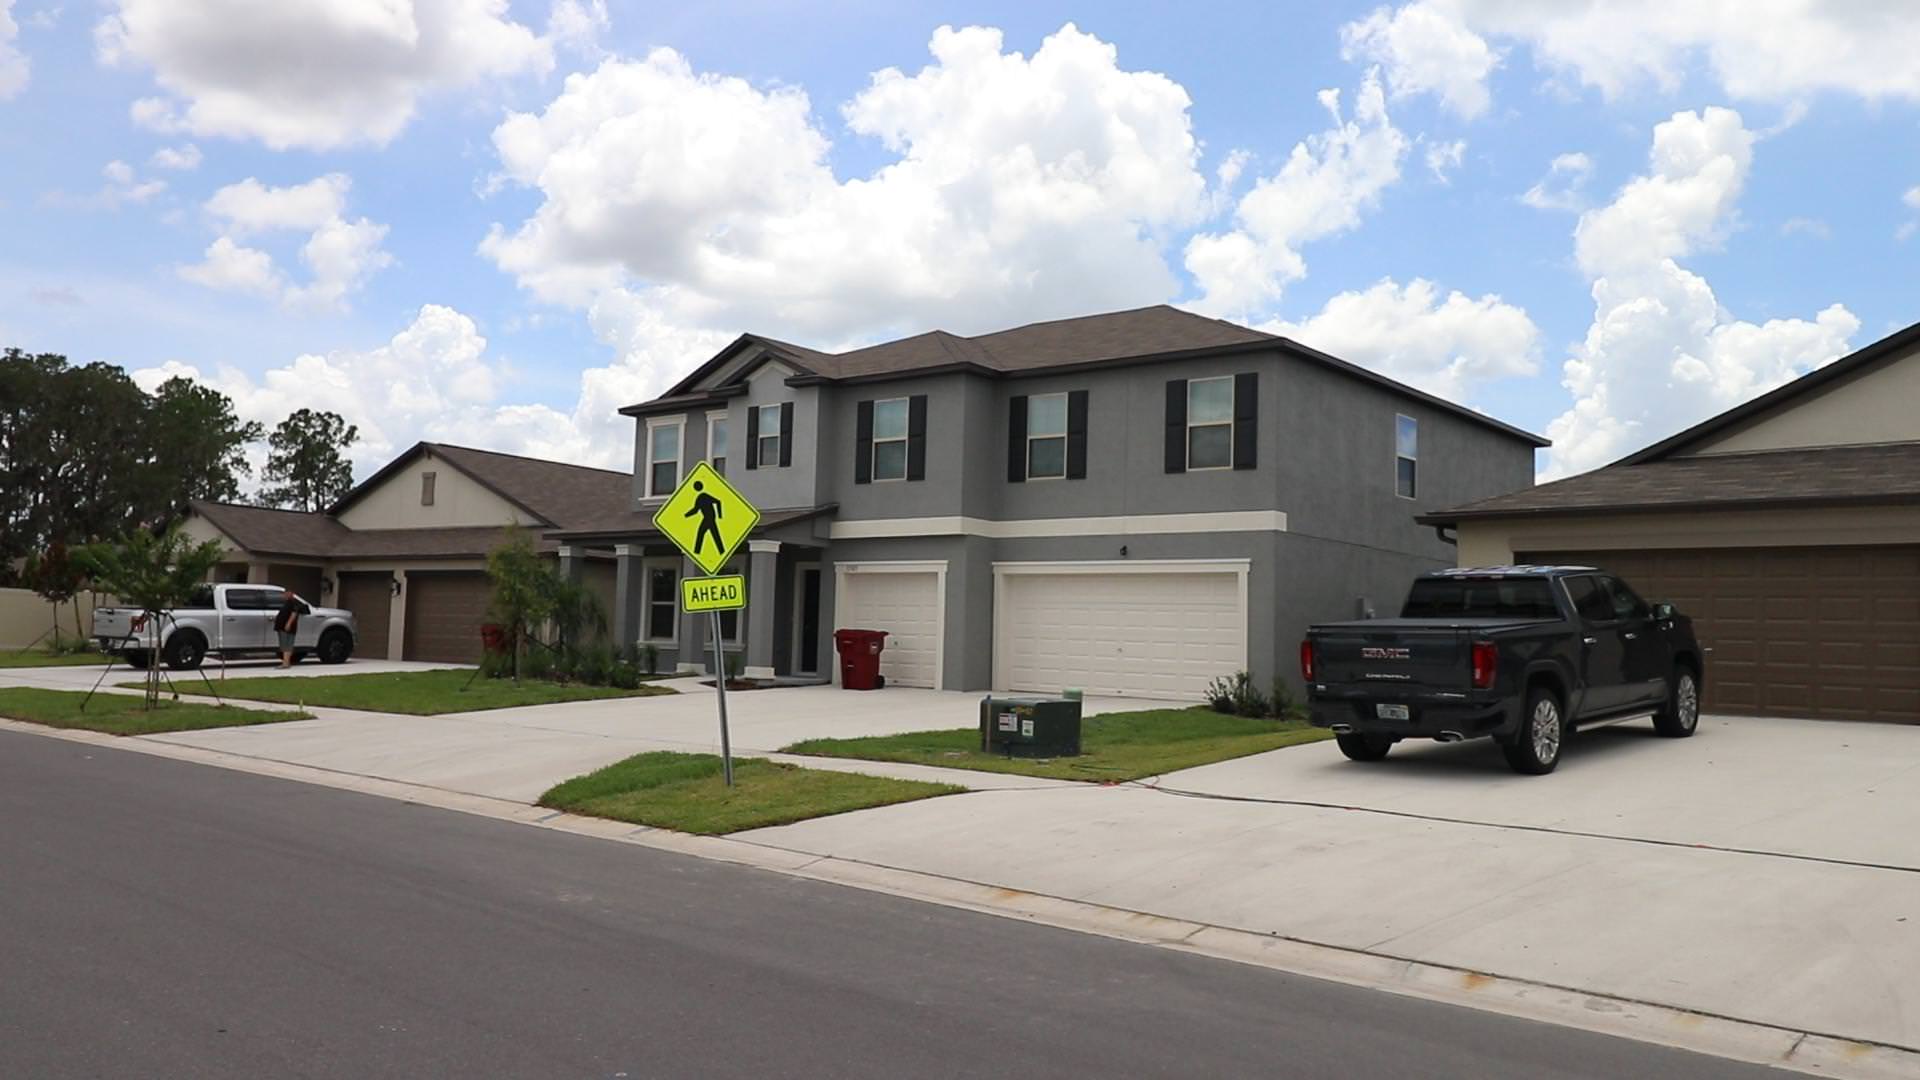 North Park Isle - Plant City FL - Two Story New Construction Homes